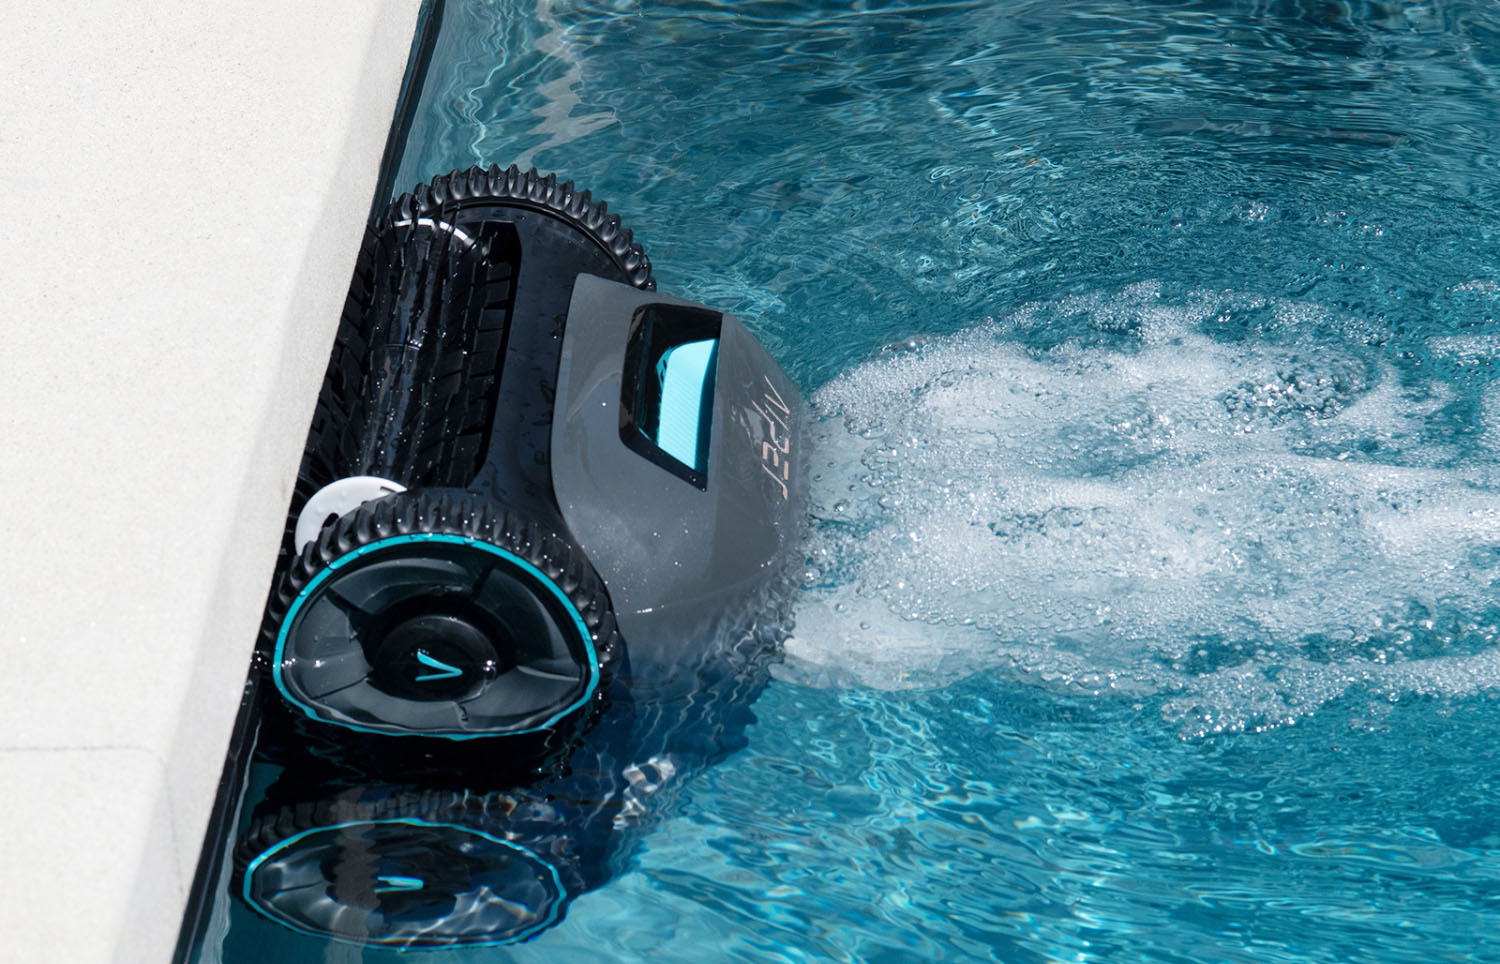 Aiper SG Pro - Cordless Robotic Pool Cleaner for In-ground Pools up to 1600sq.ft, Automatic Pool Vacuum